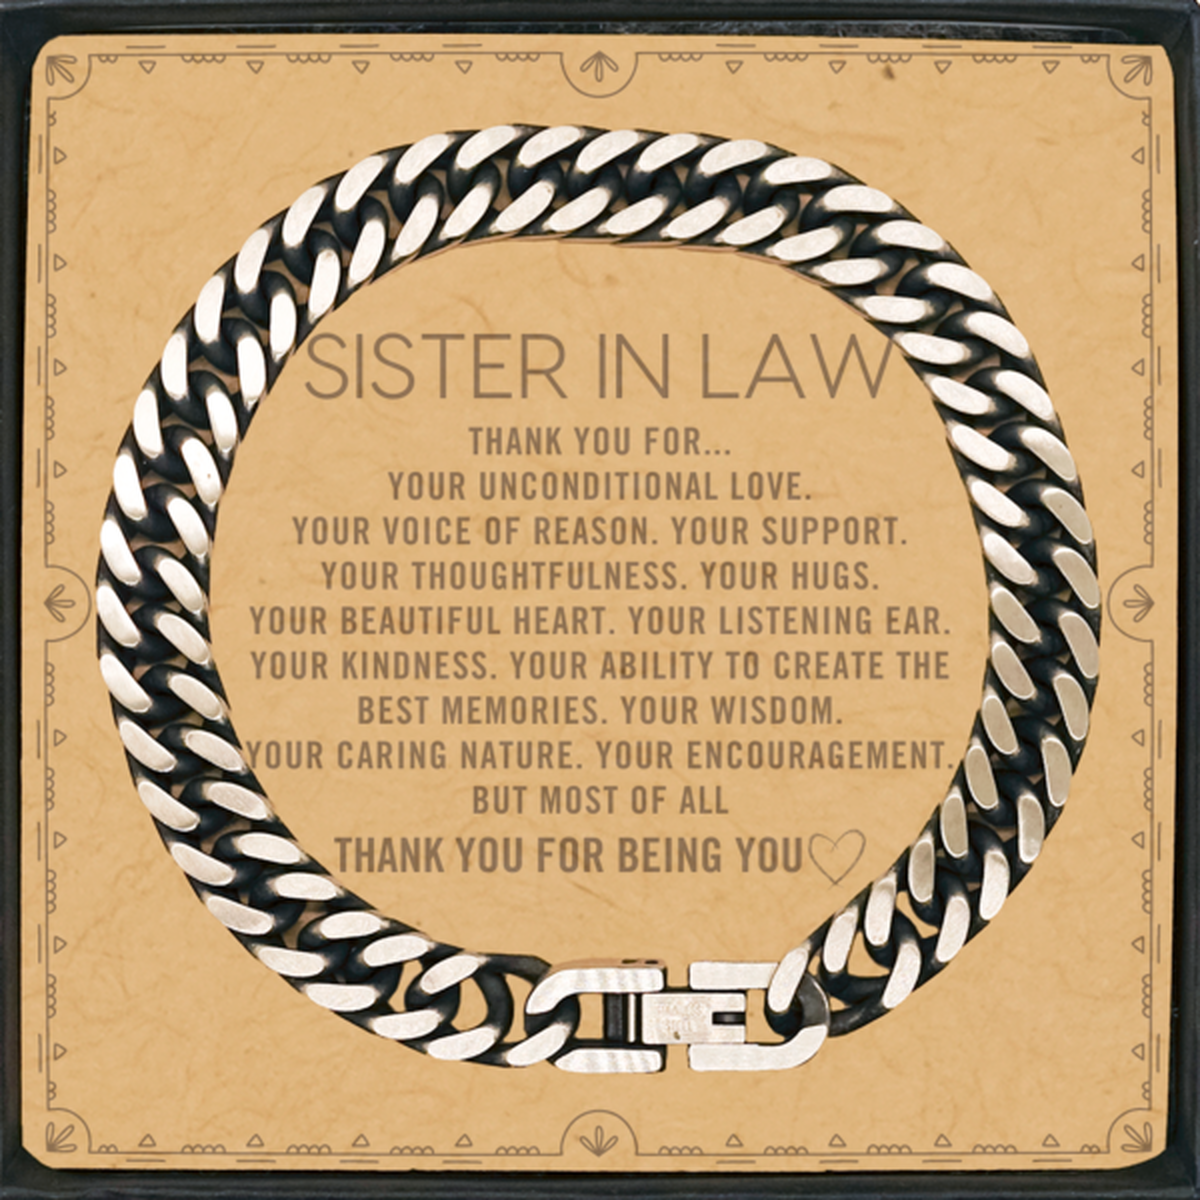 Sister In Law Cuban Link Chain Bracelet Custom, Message Card Gifts For Sister In Law Christmas Graduation Birthday Gifts for Men Women Sister In Law Thank you for Your unconditional love